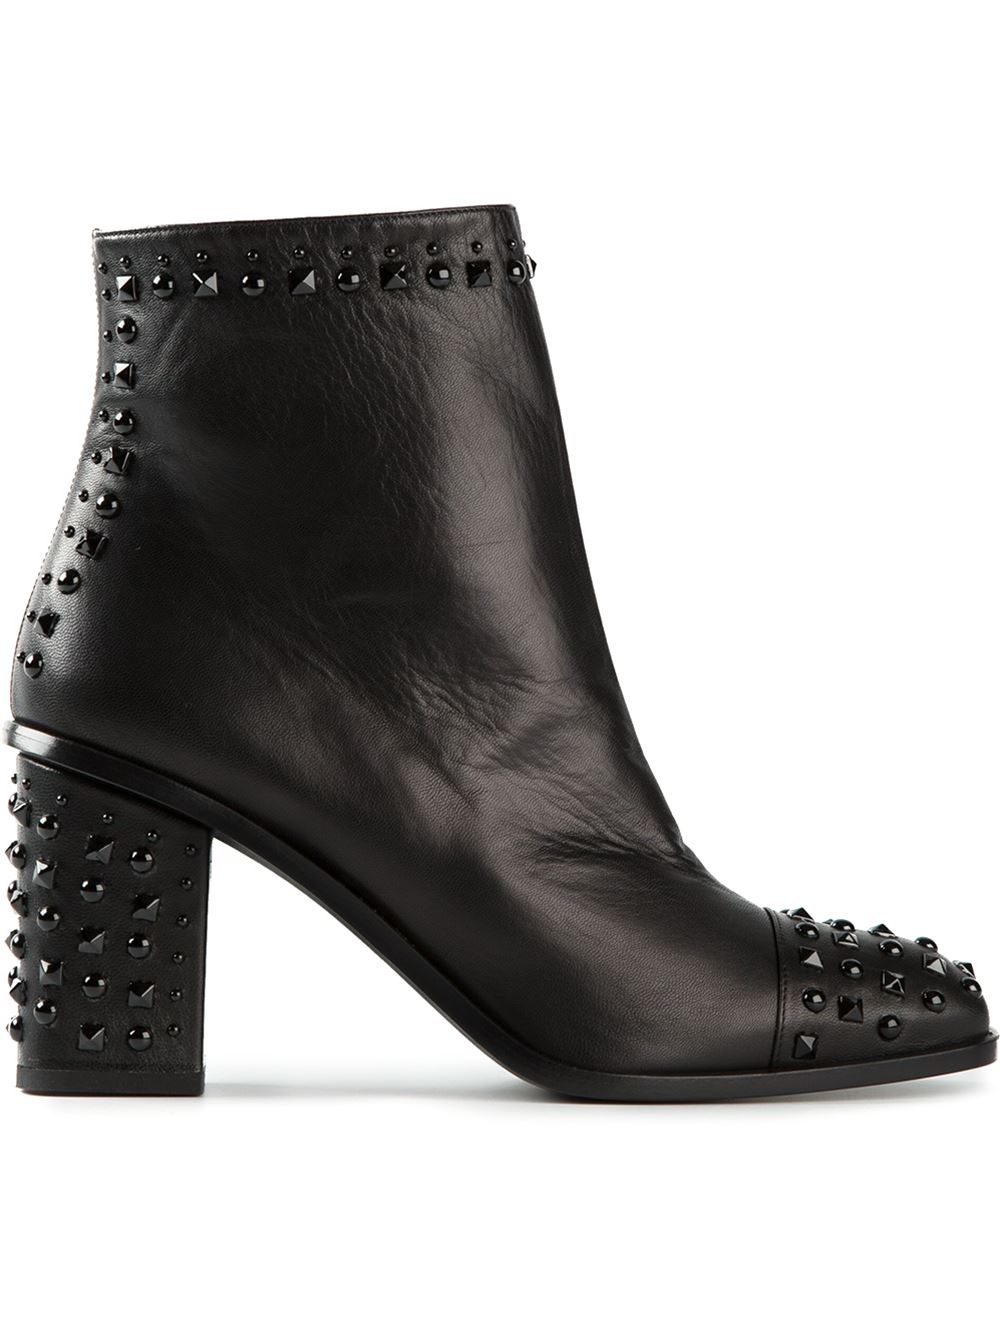 Alexander Mcqueen Studded Ankle Boots in Black | Lyst